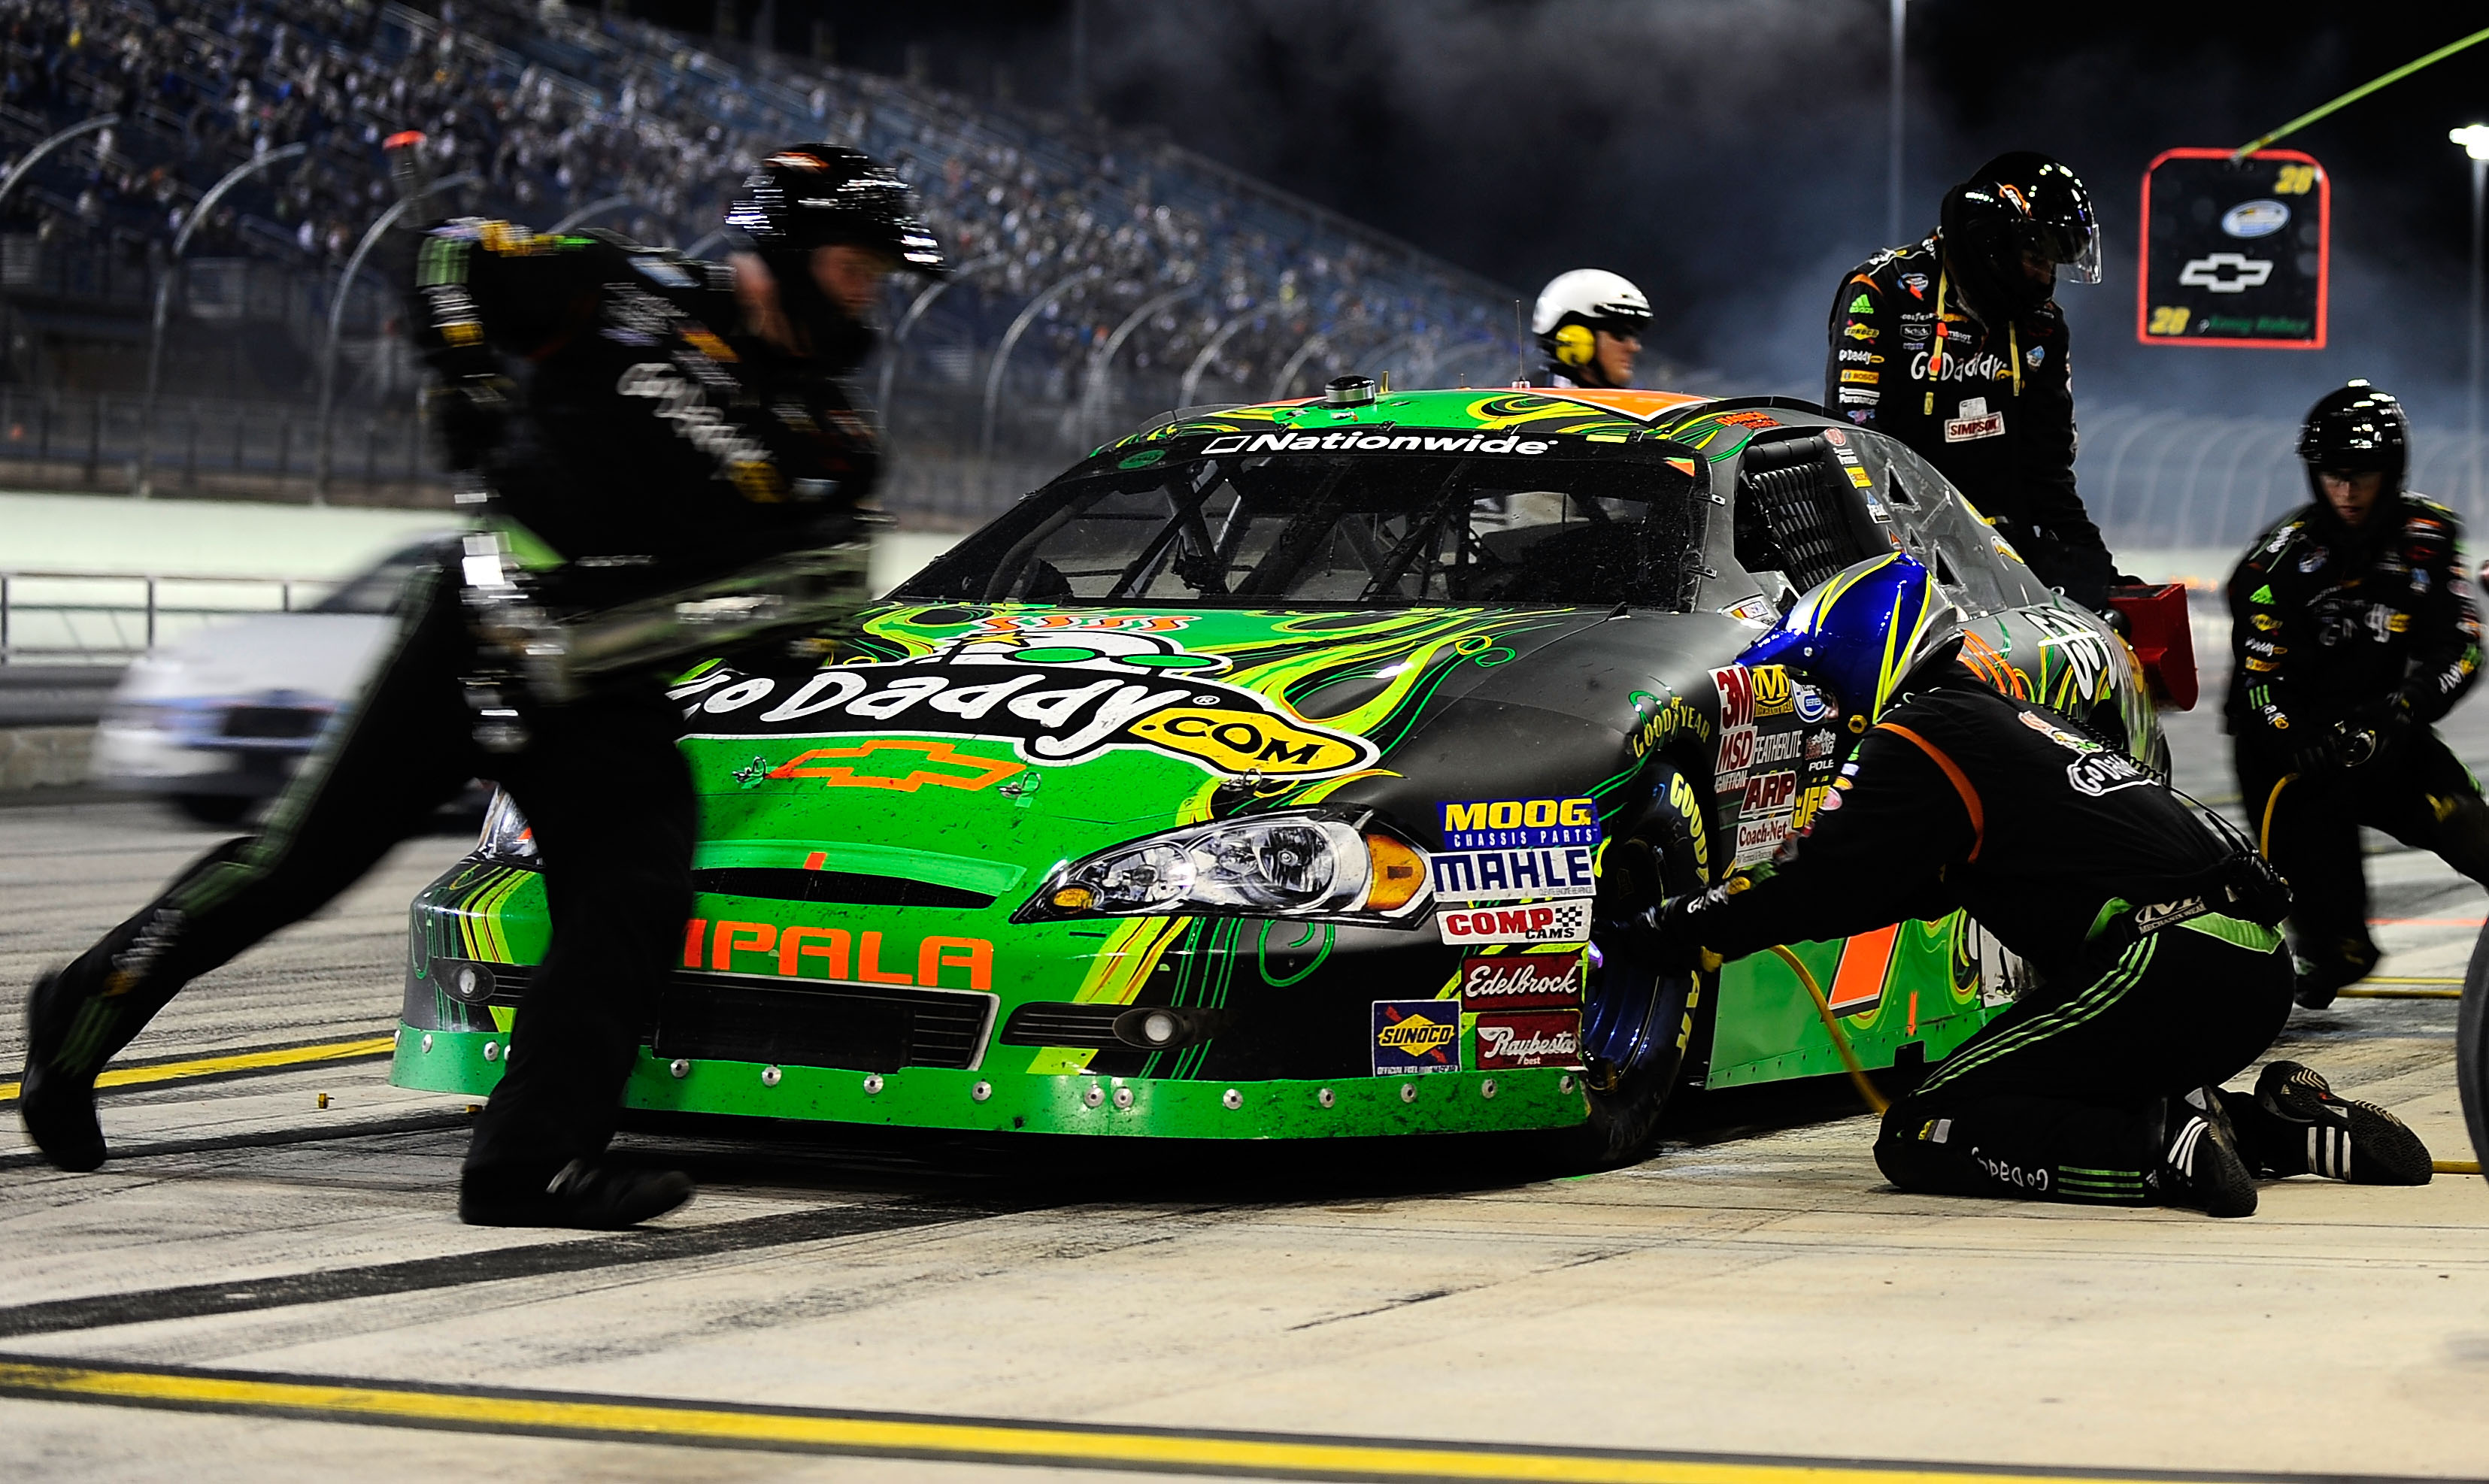 HOMESTEAD, FL - NOVEMBER 20:  Danica Patrick, driver of the #7 GoDaddy.com Chevrolet, makes a pit stop during the NASCAR Nationwide Series Ford 300 at Homestead-Miami Speedway on November 20, 2010 in Homestead, Florida.  (Photo by Rusty Jarrett/Getty Imag